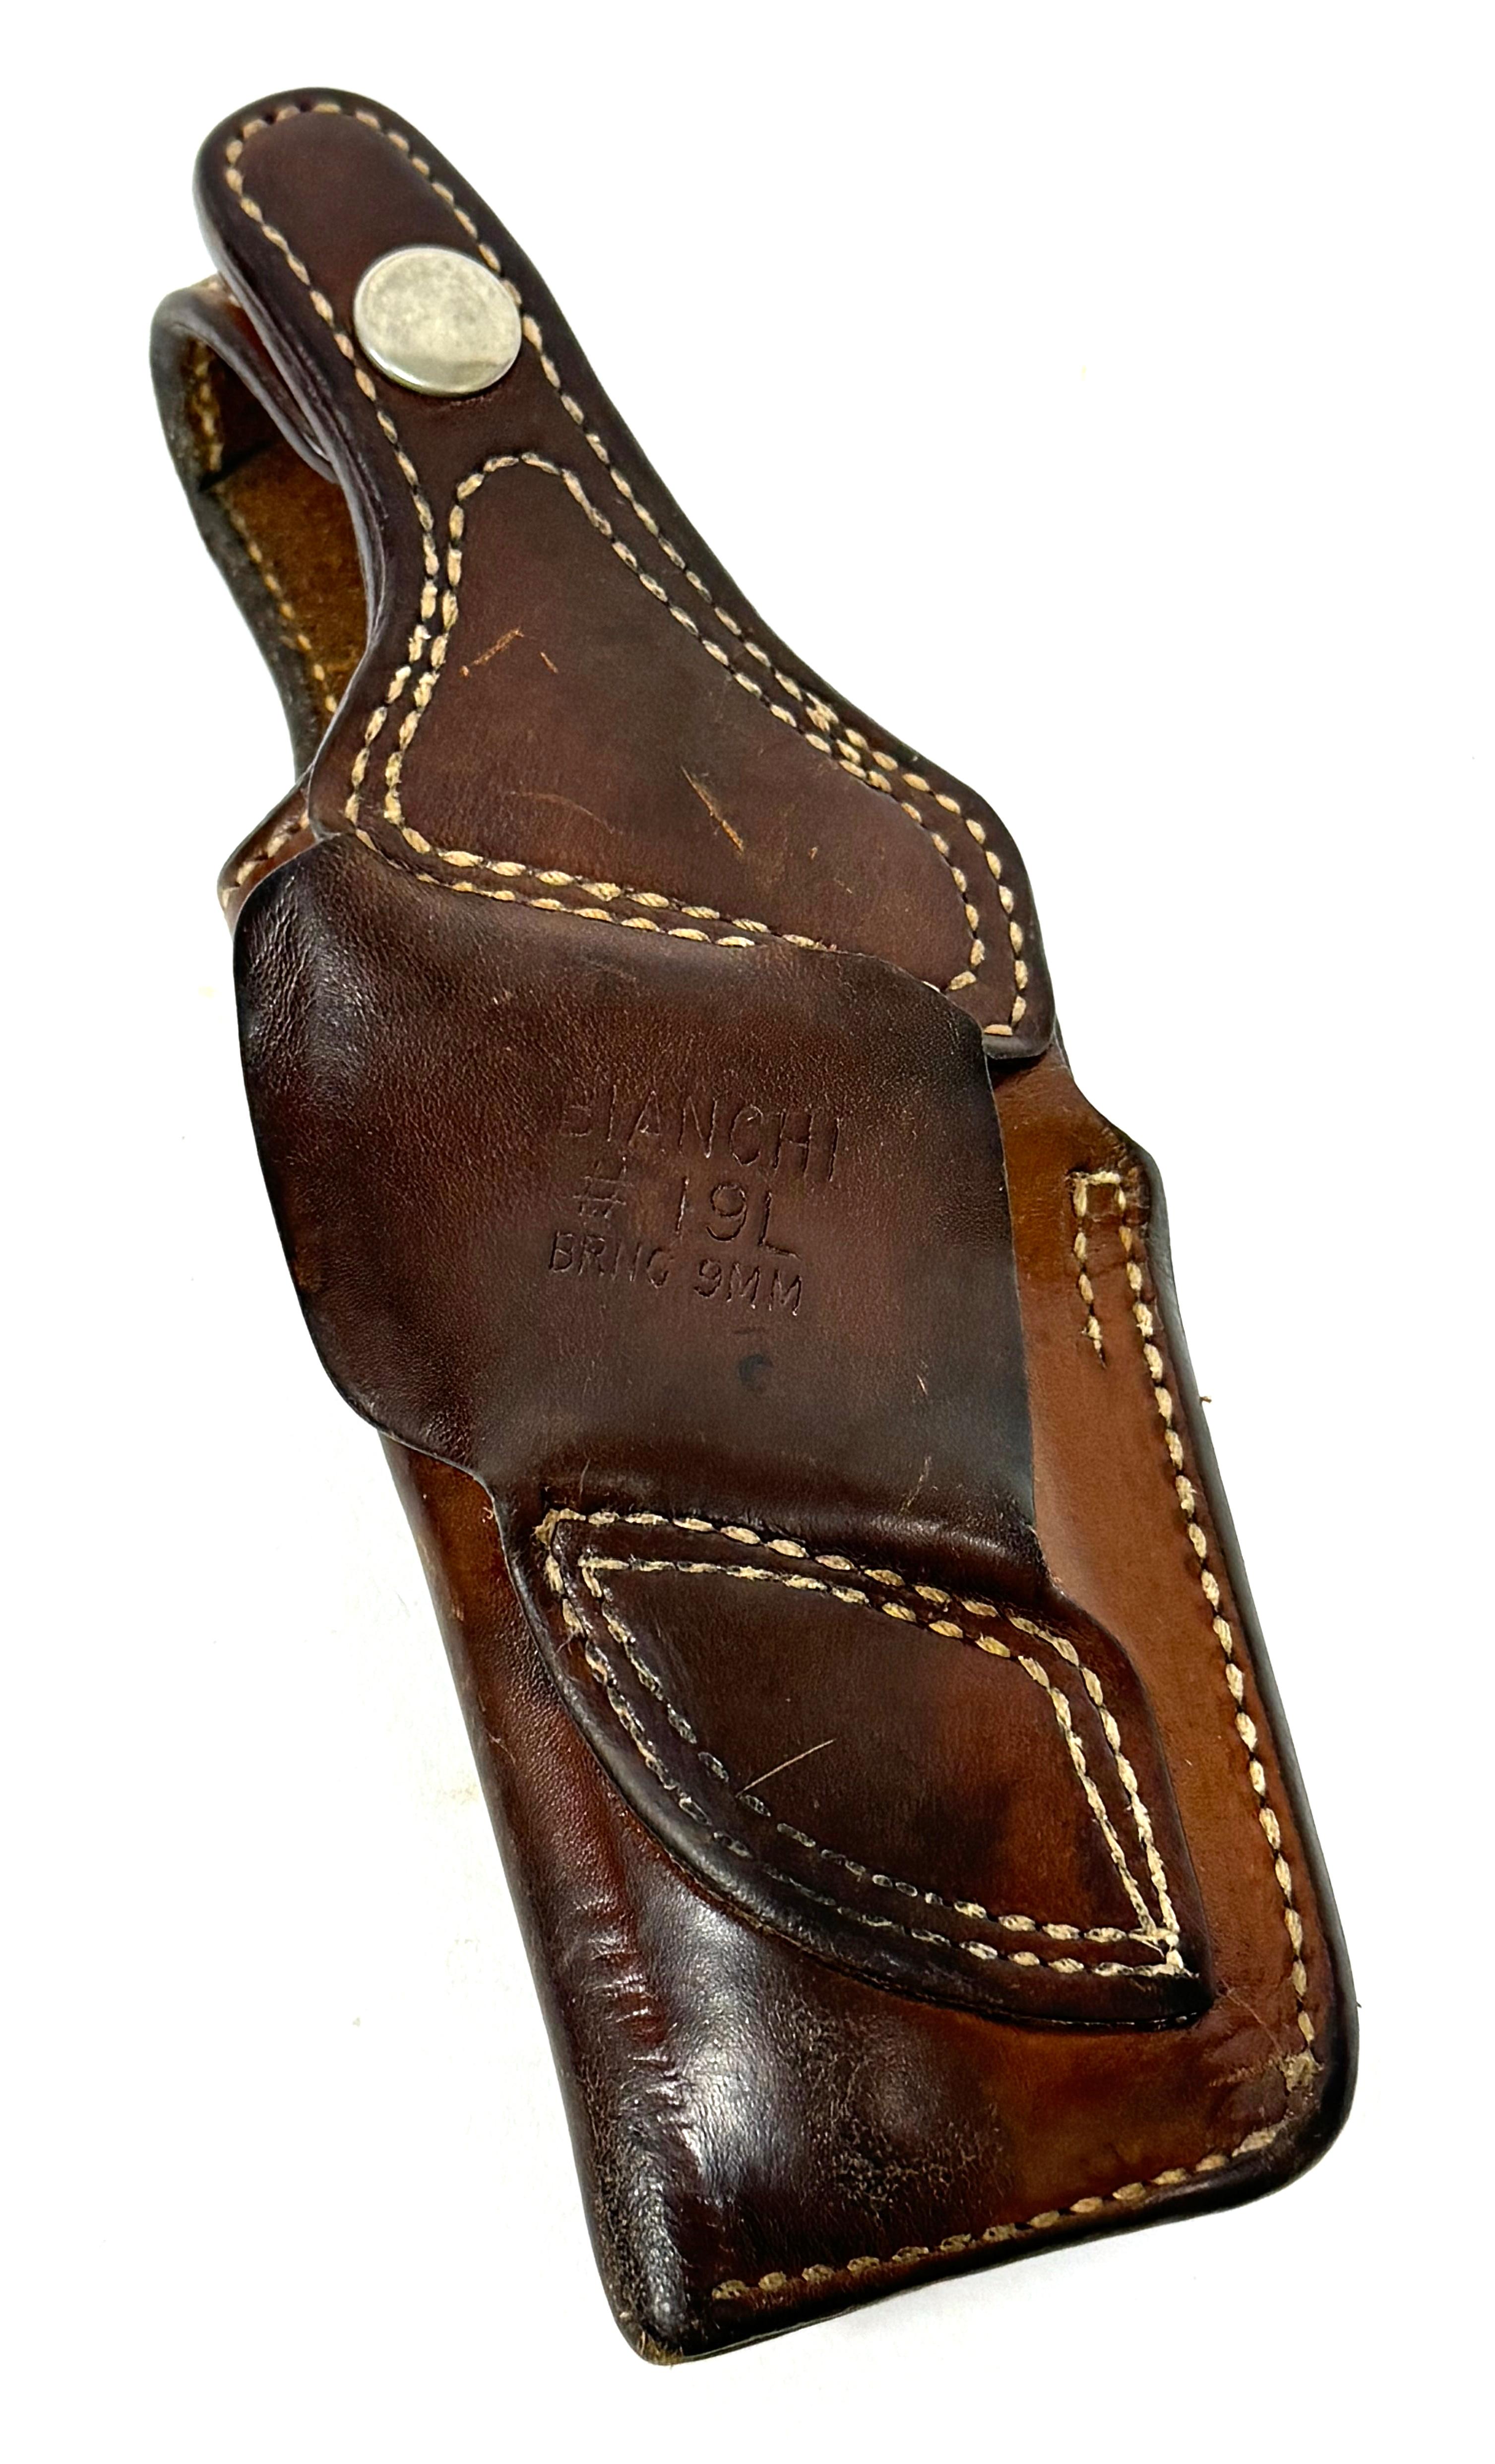 Bianchi #19L BRNG 9MM Leather Holster for Browning Hi Power